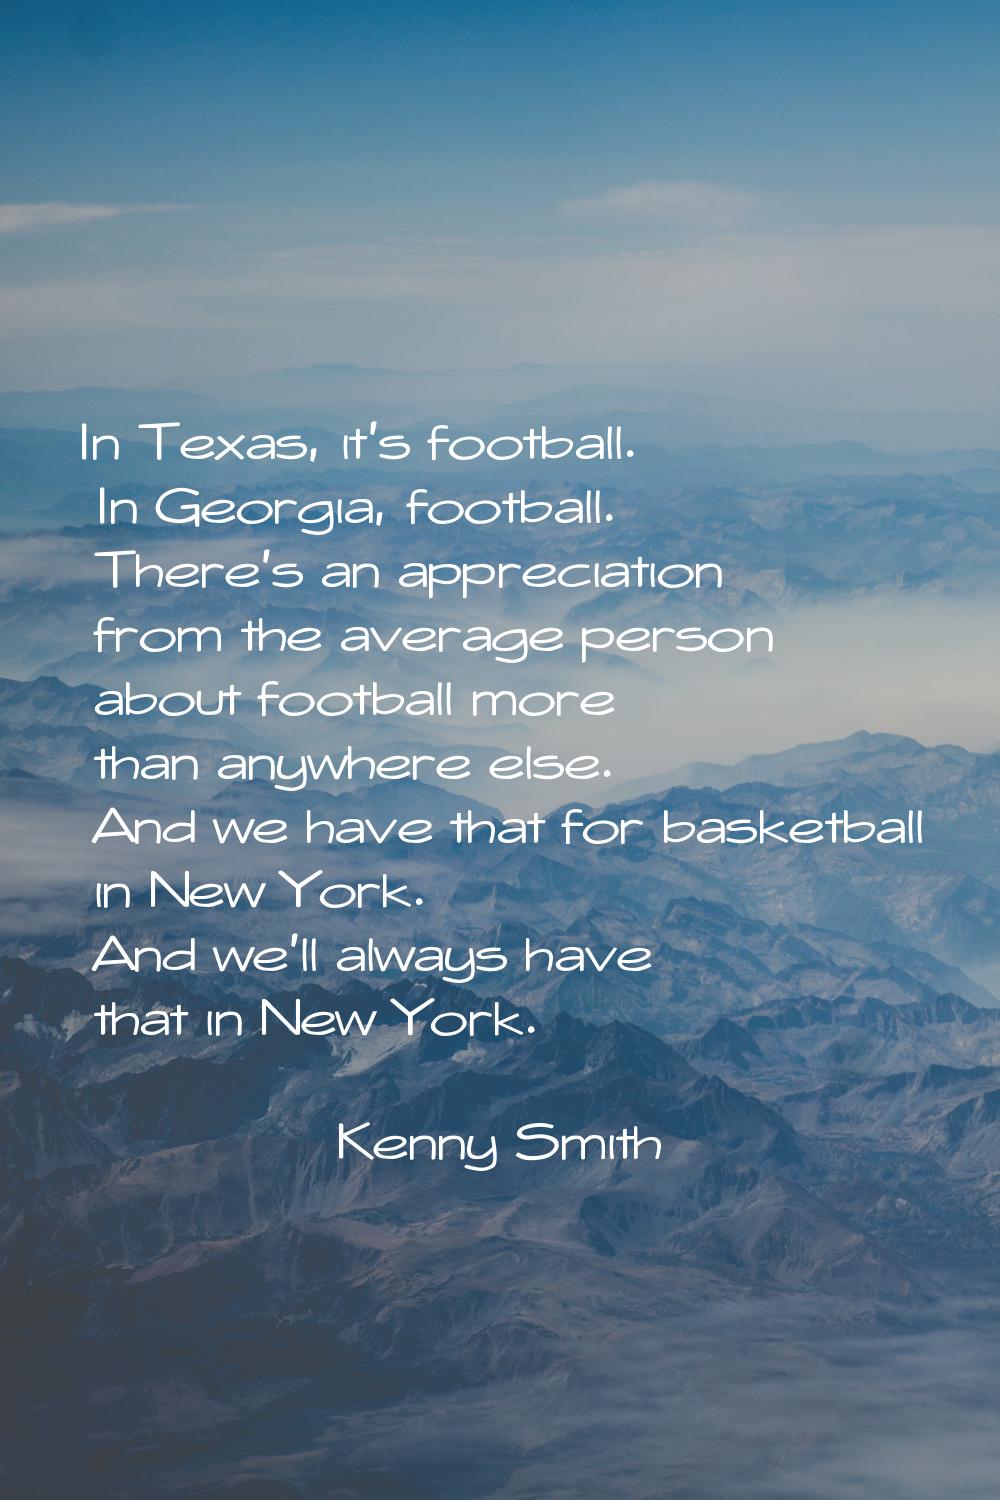 In Texas, it's football. In Georgia, football. There's an appreciation from the average person abou